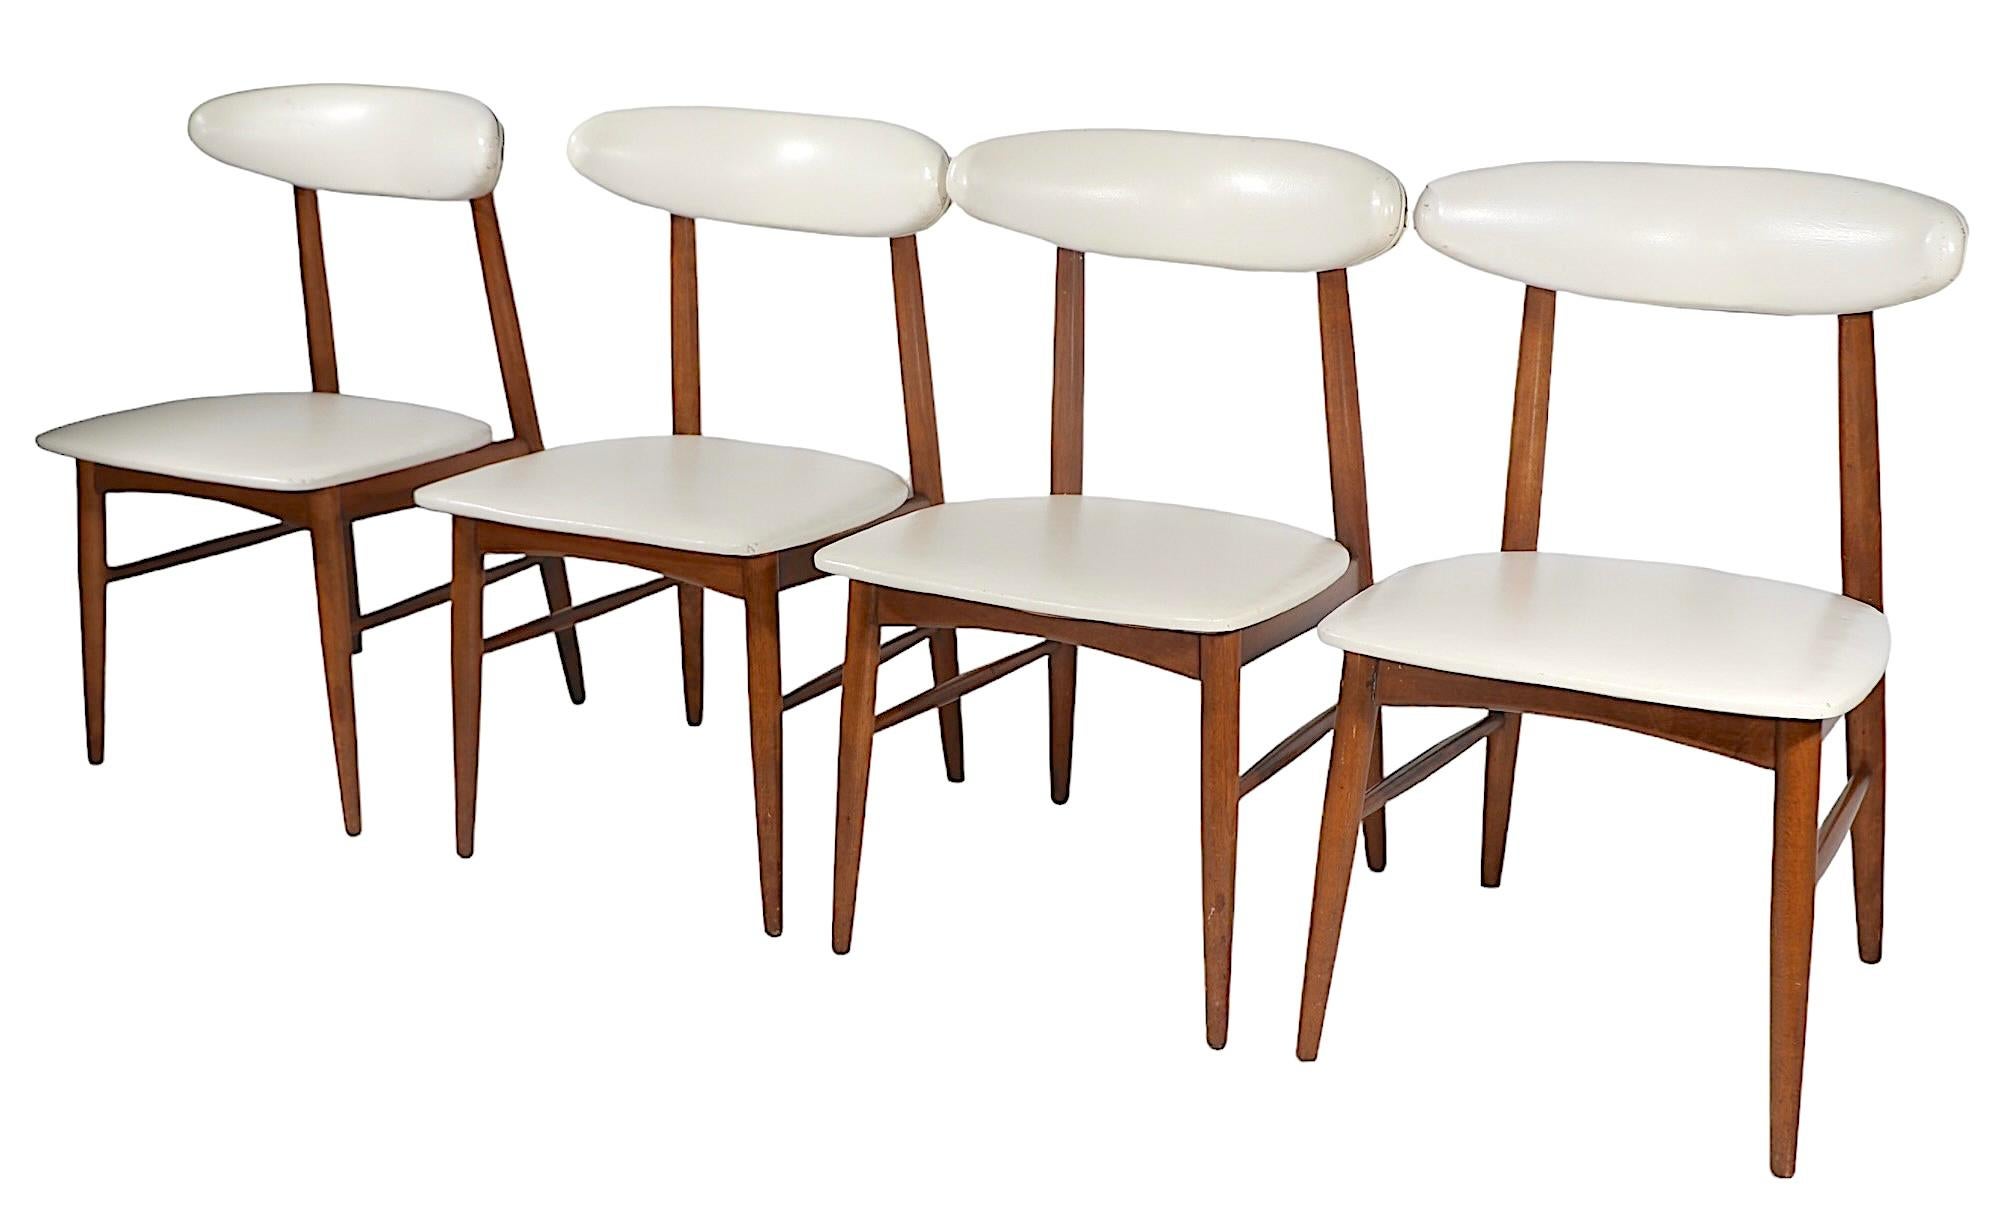 5 pc Mid Century Dinette Set by Viko Baumritter c 1950’s For Sale 8